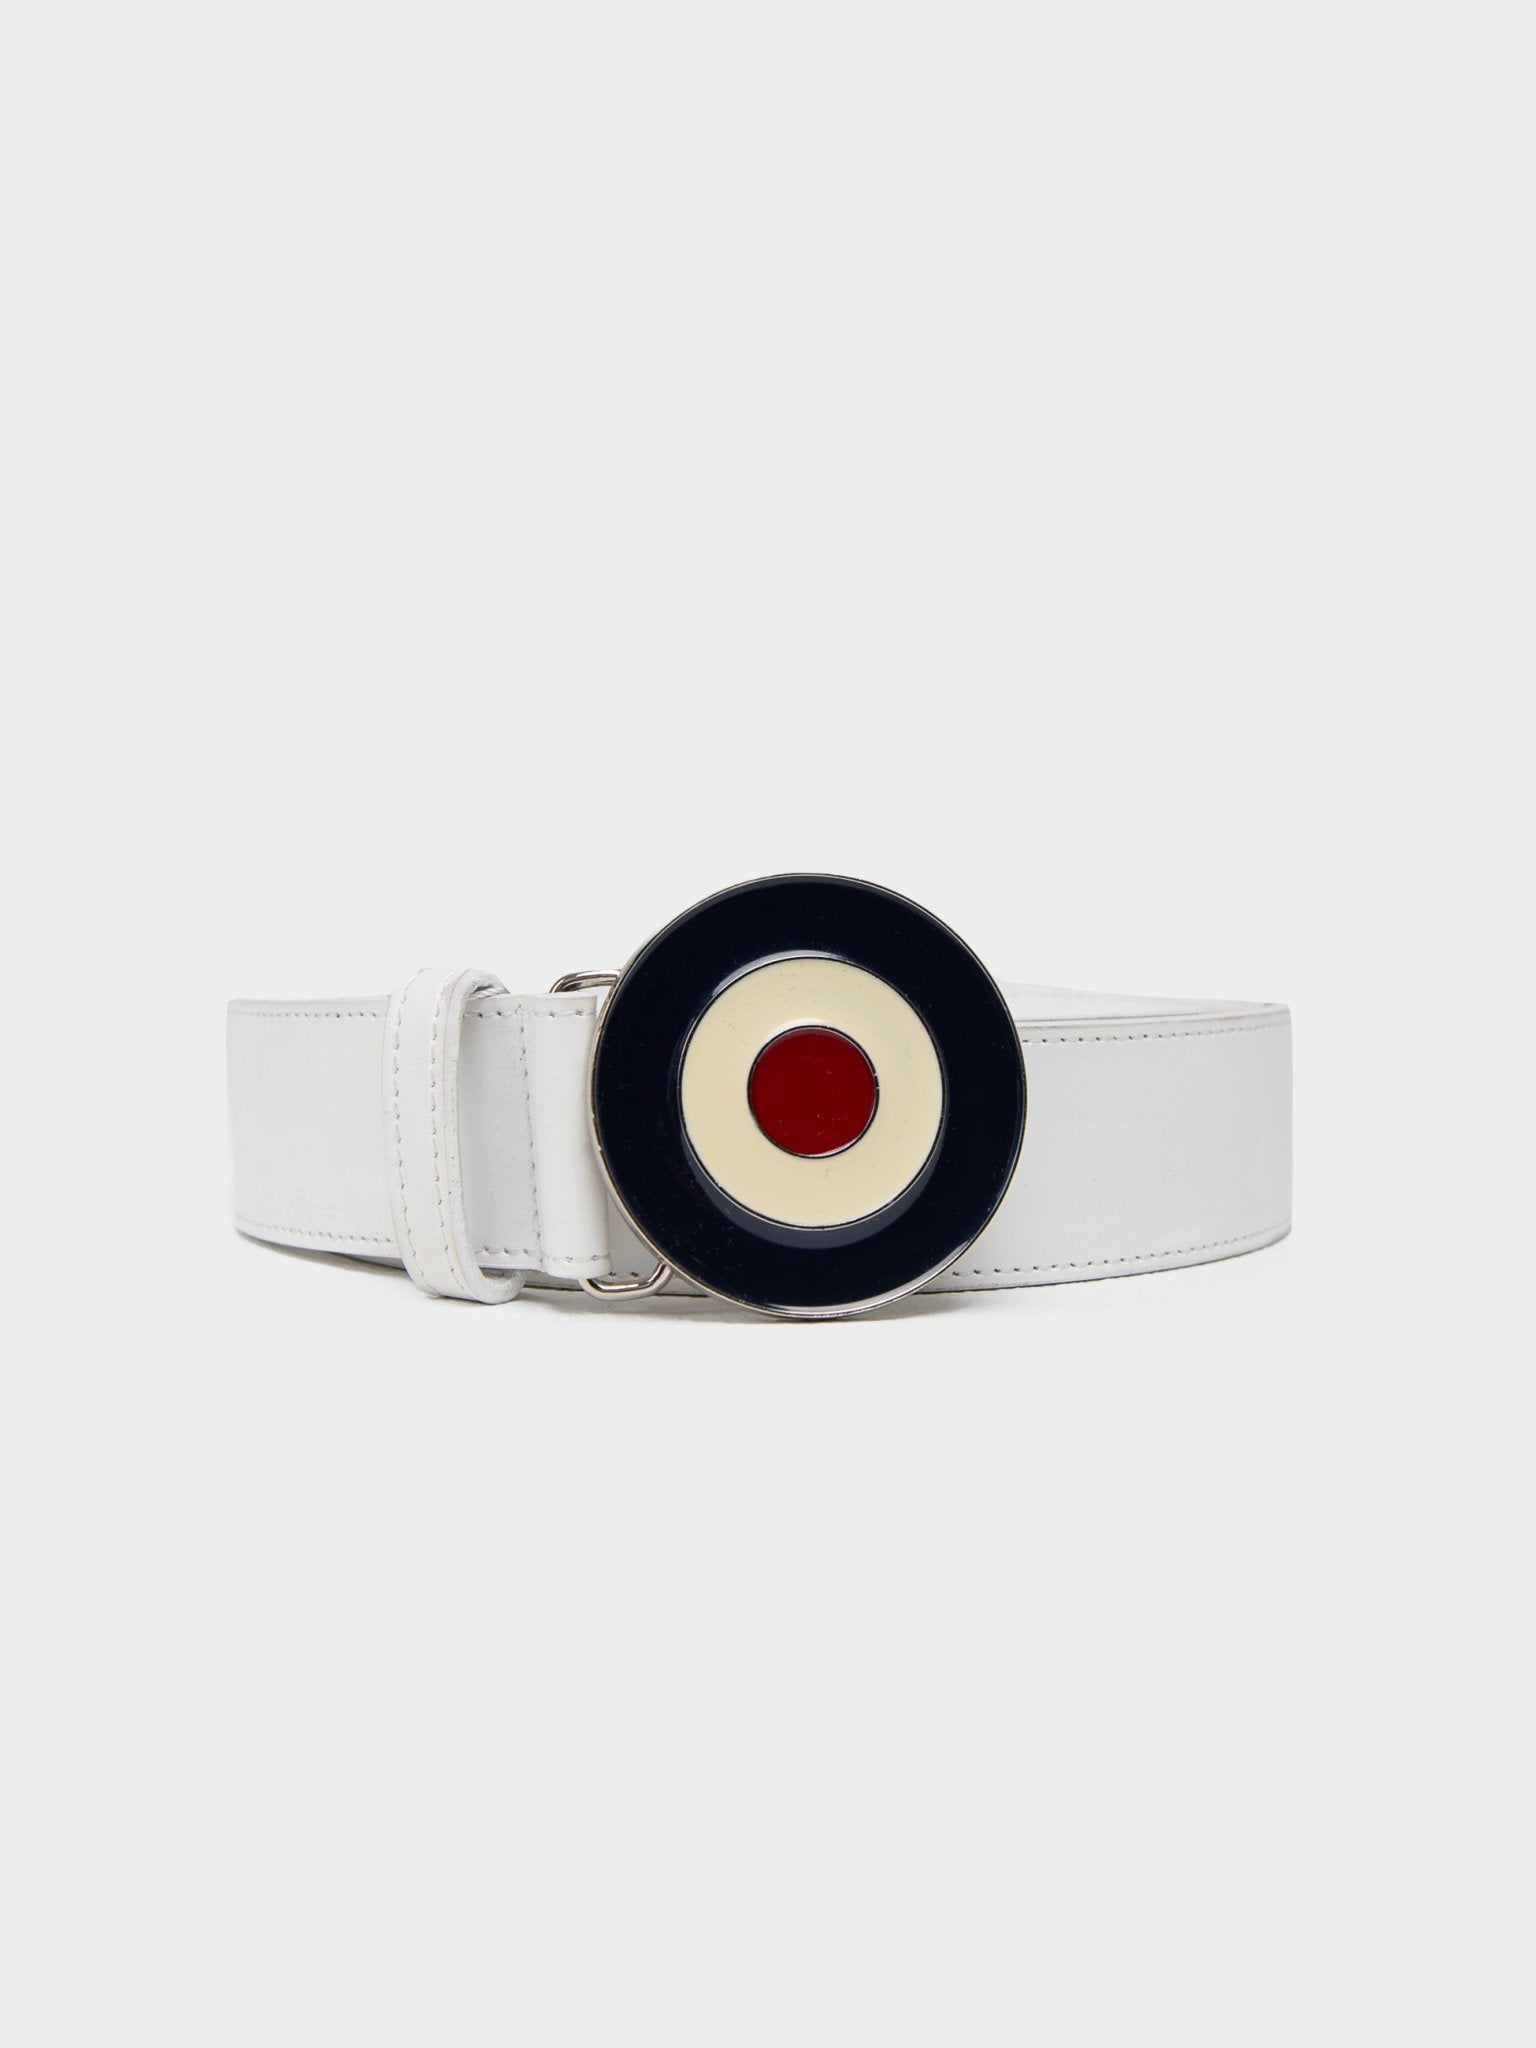 Target Buckle Belt (Leather) - White